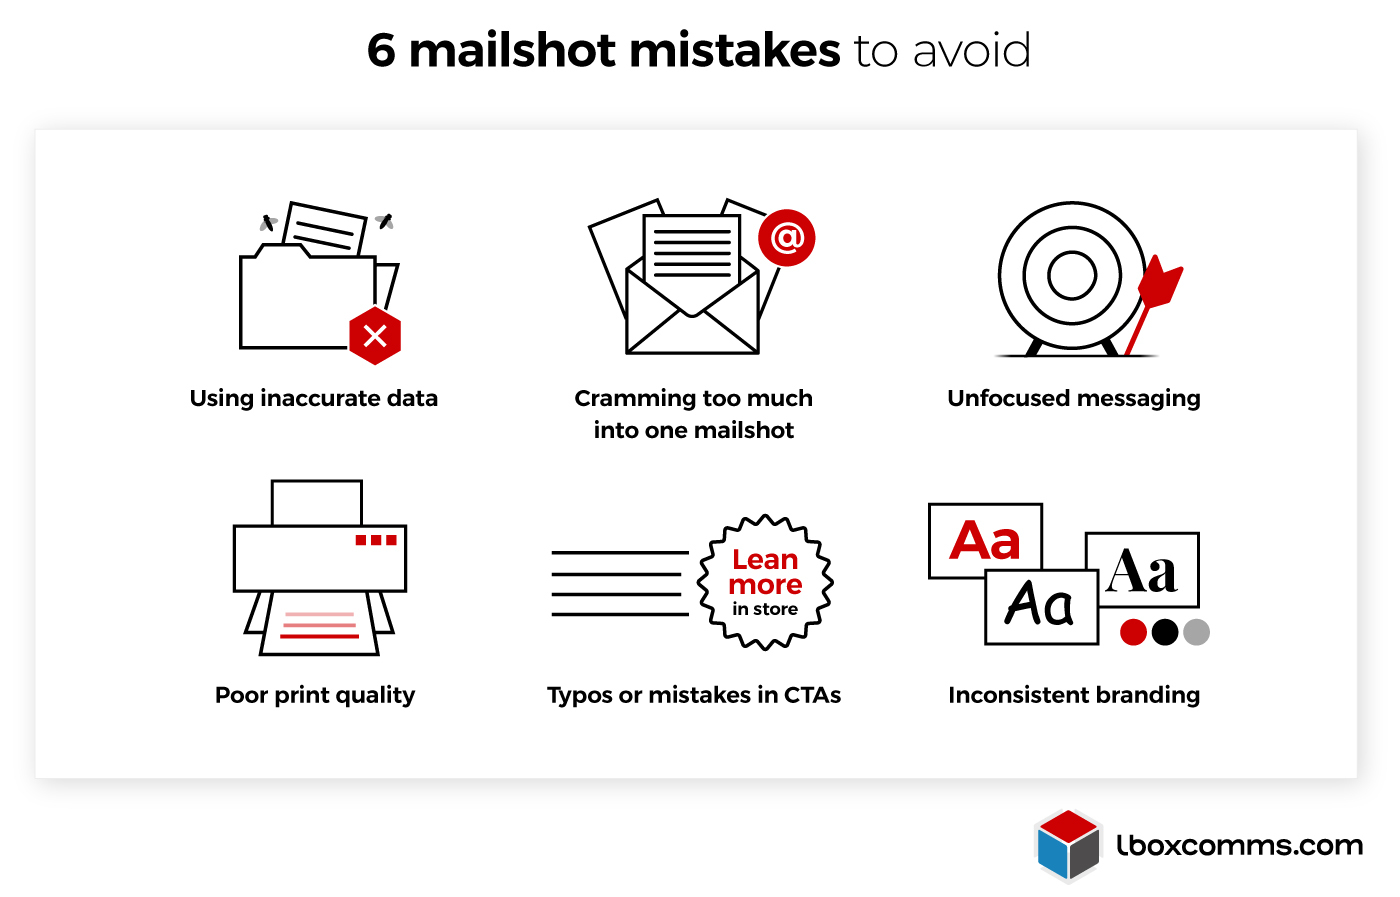 6 mailshot campaign mistakes to avoid - infographic image